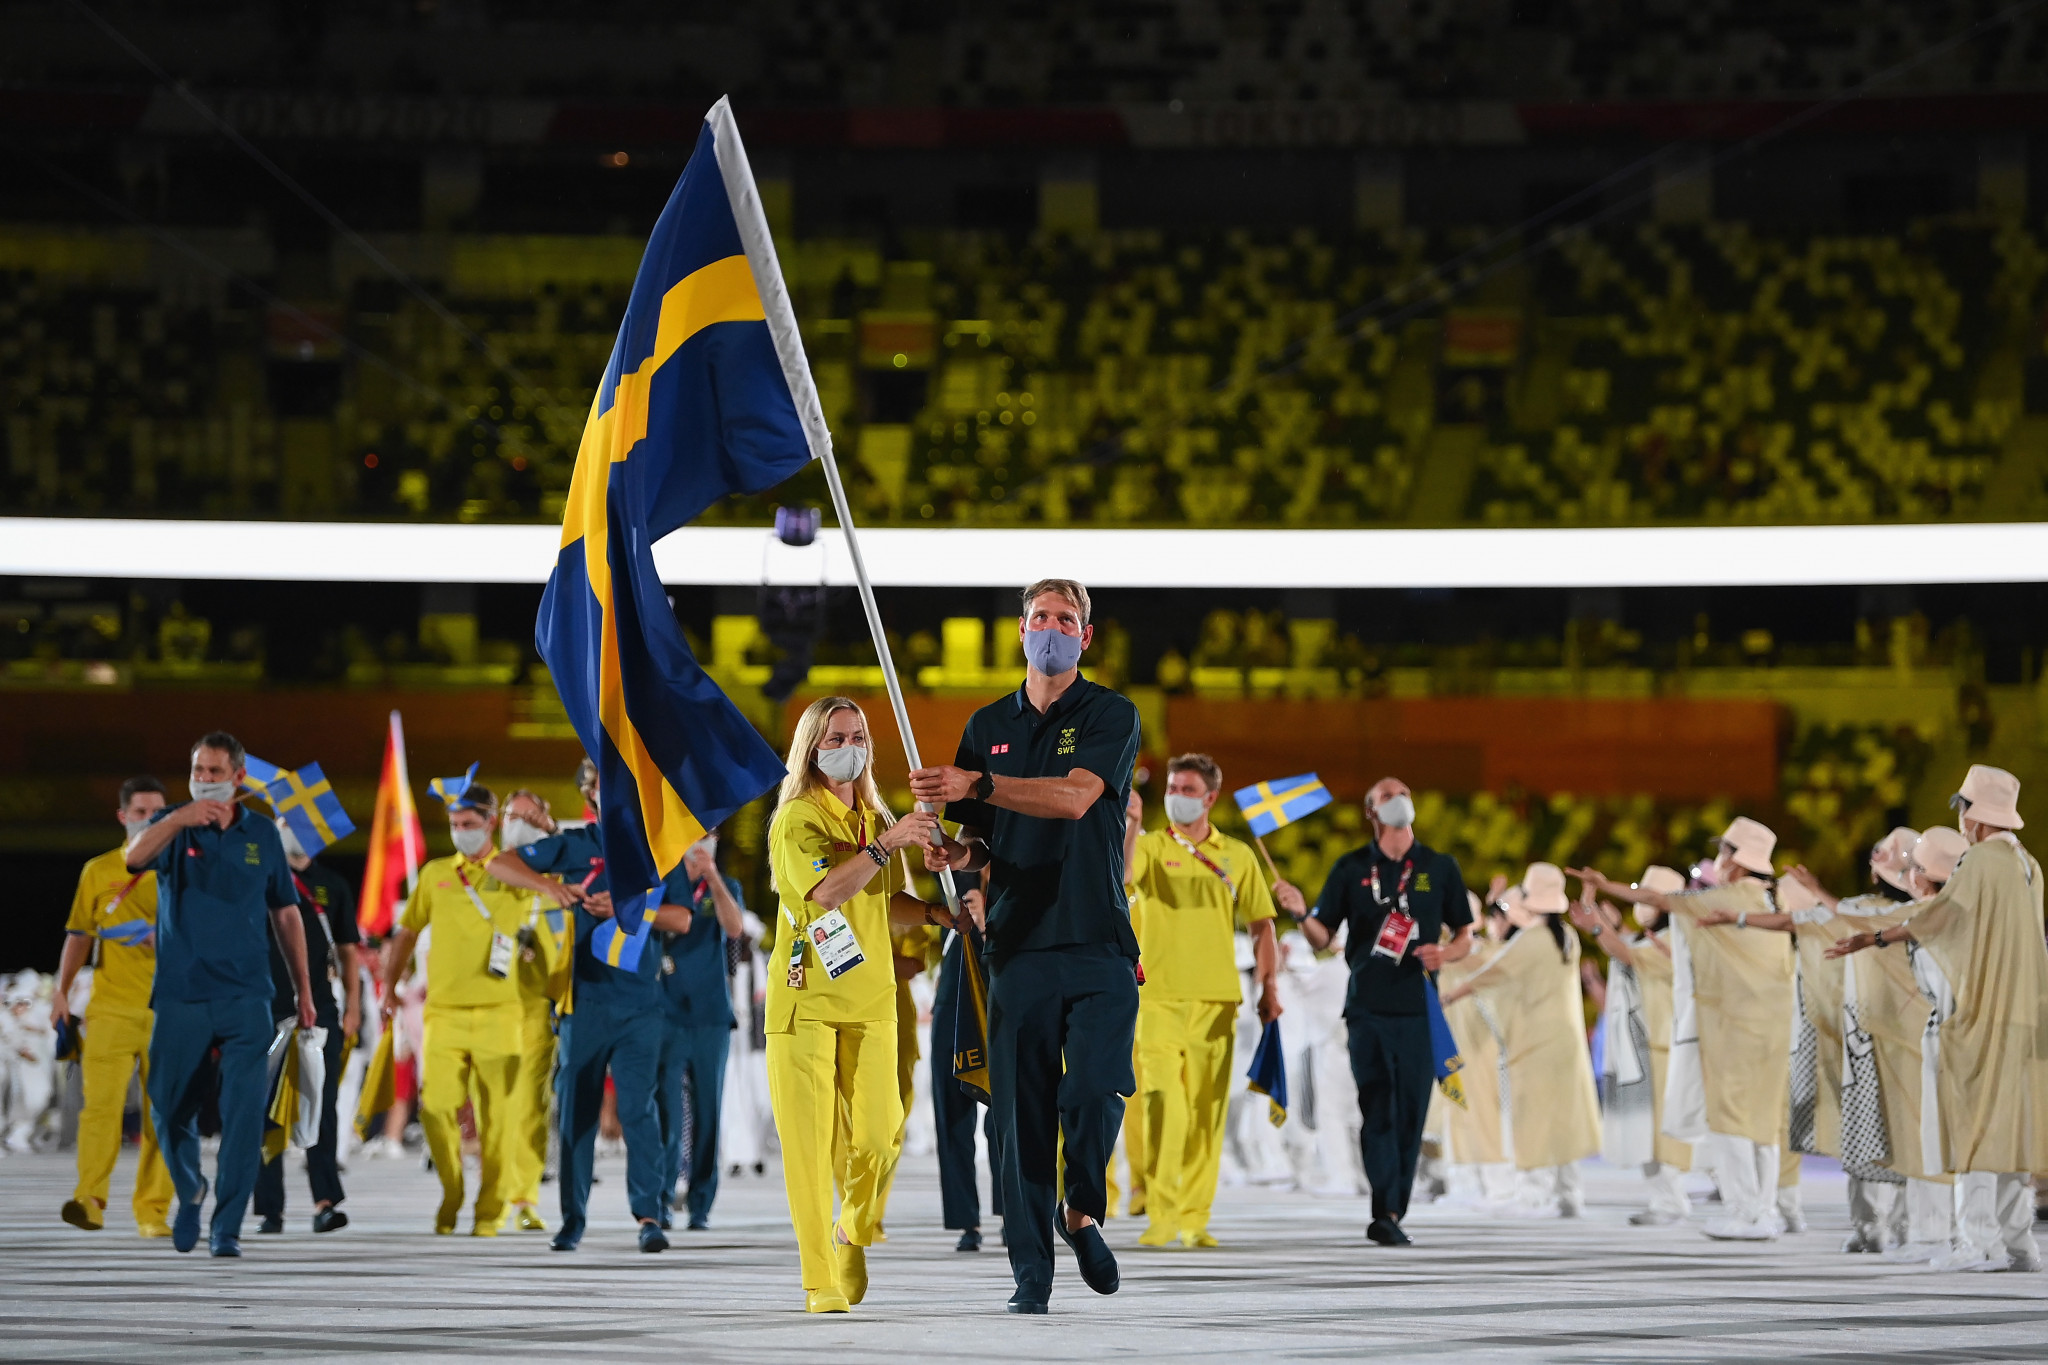 Sweden has launched a coaching drive leading up to Paris 2024 ©Getty Images